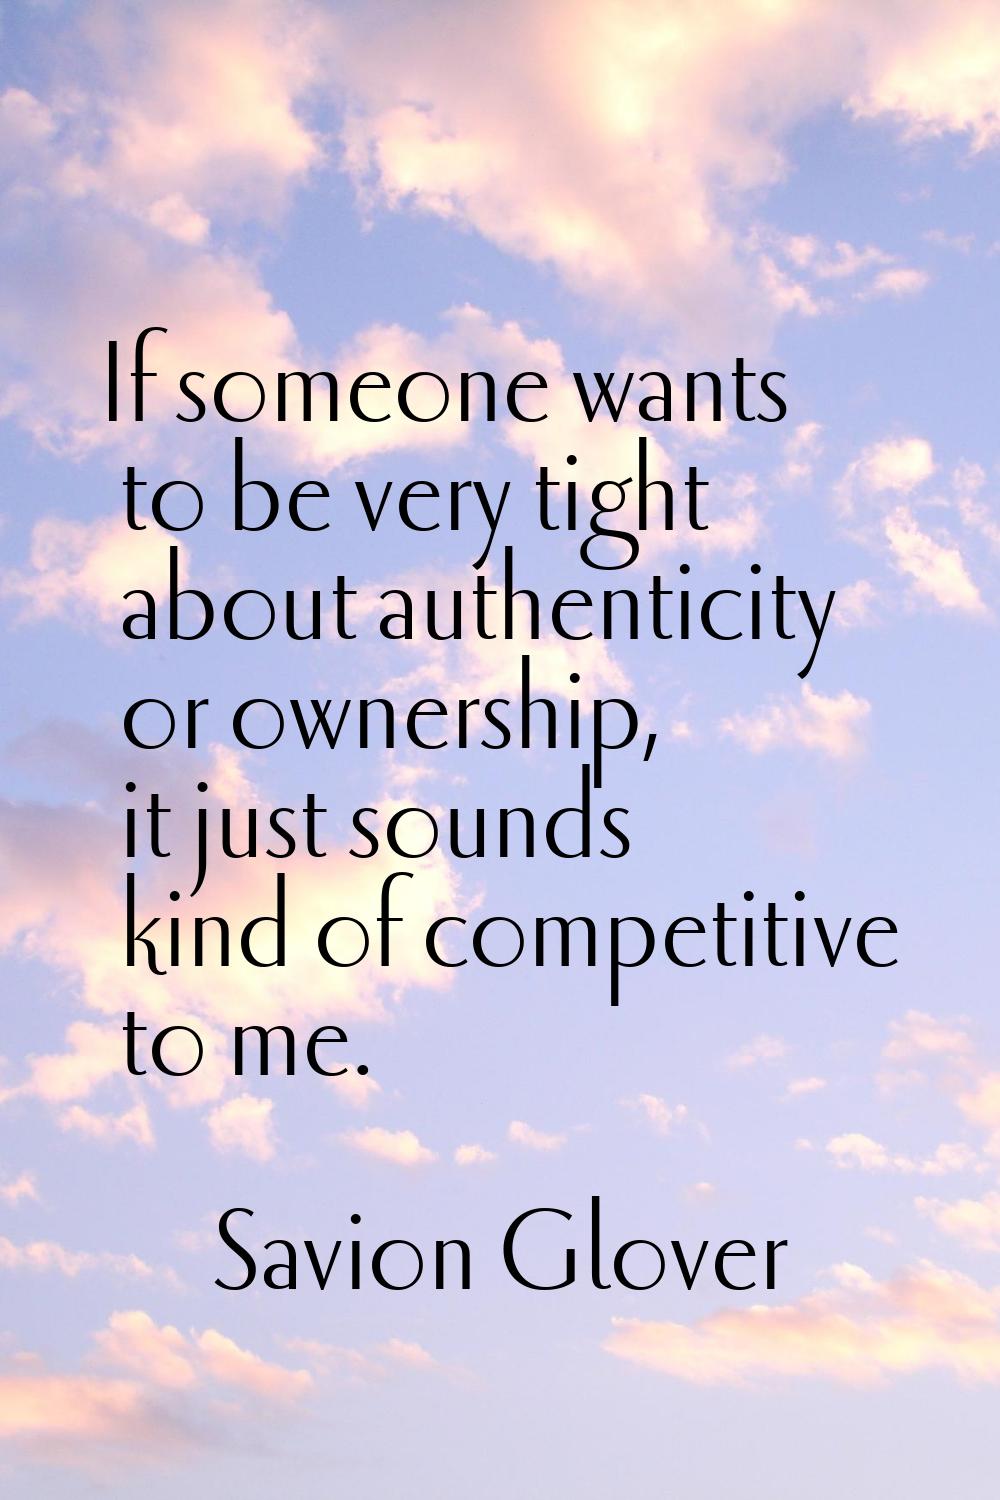 If someone wants to be very tight about authenticity or ownership, it just sounds kind of competiti